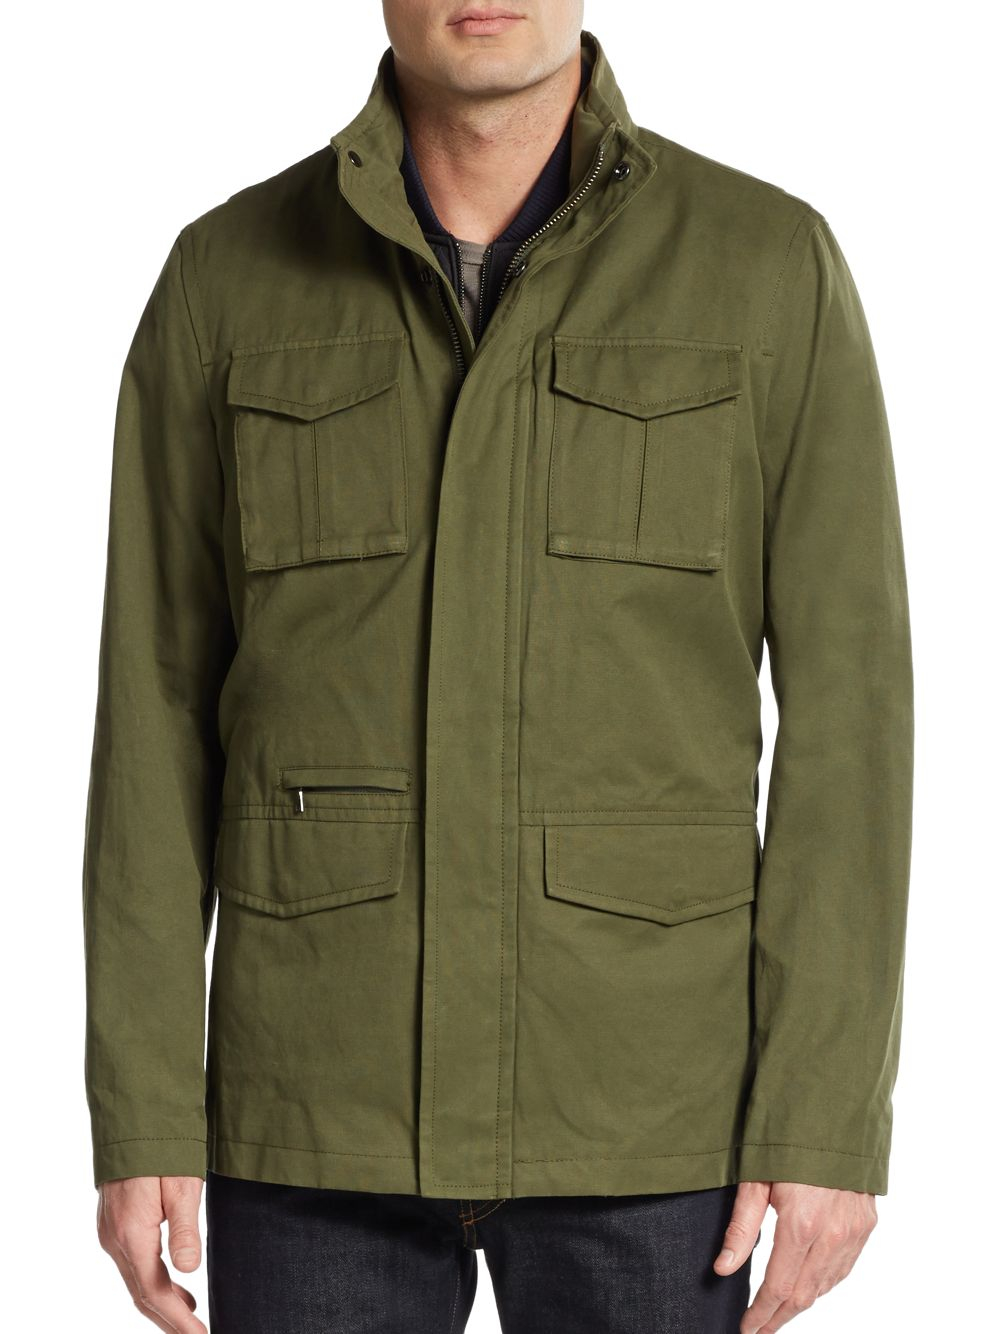 Lyst - Vince Military Jacket in Green